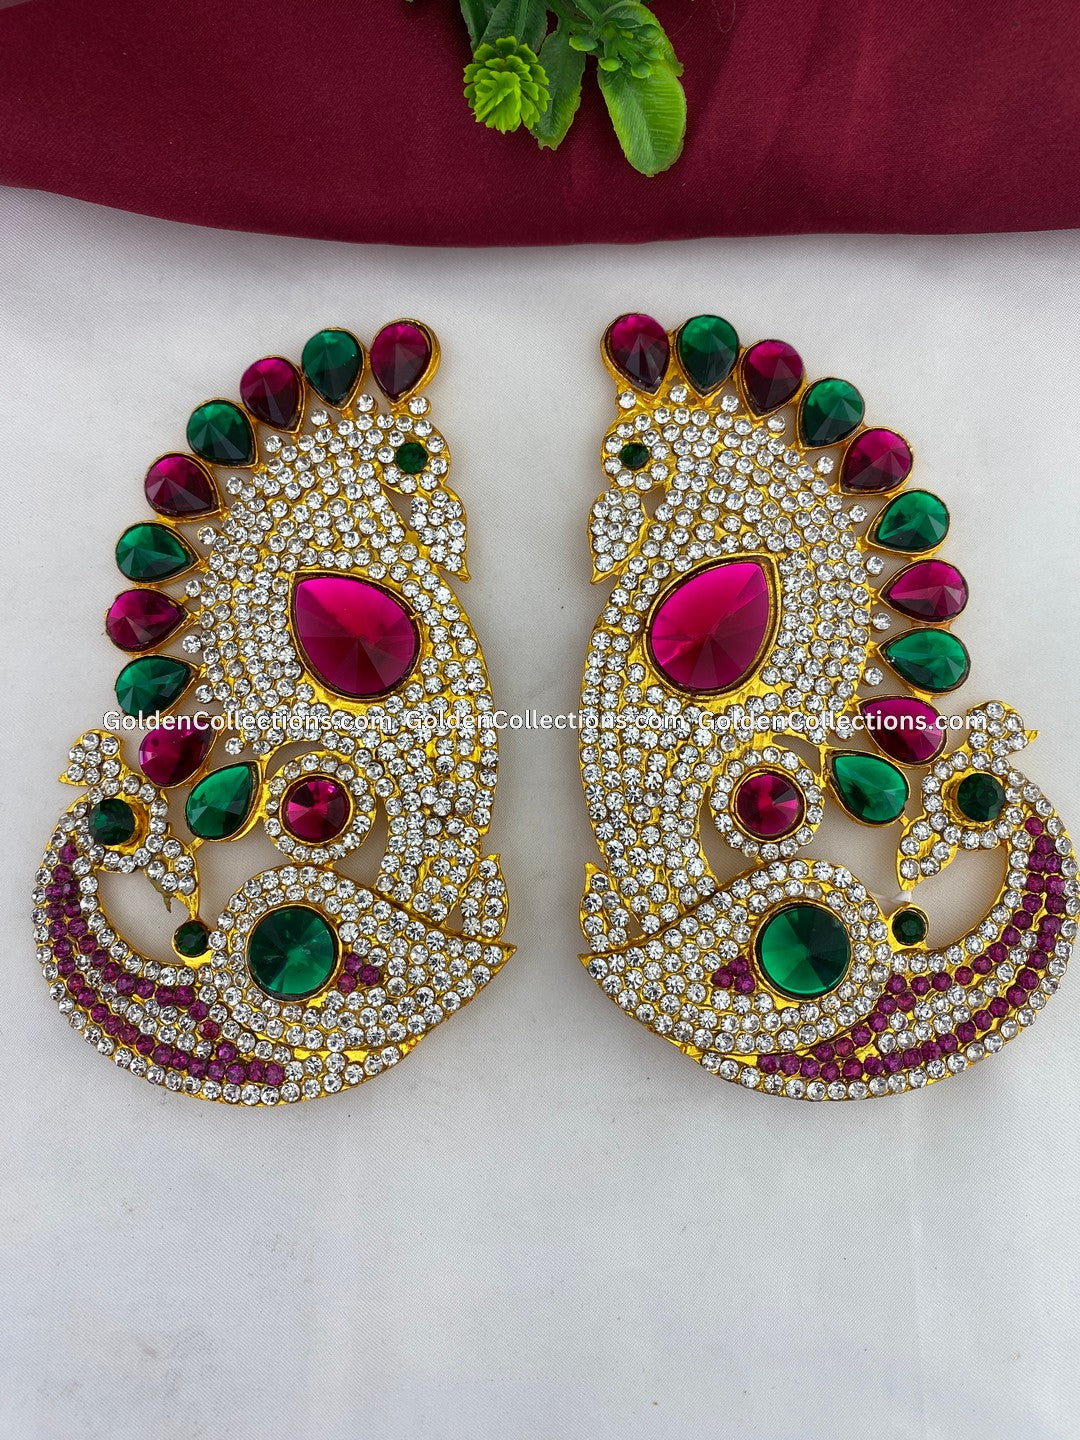 God Earrings - Divine Jewels - GoldenCollections DGE-010